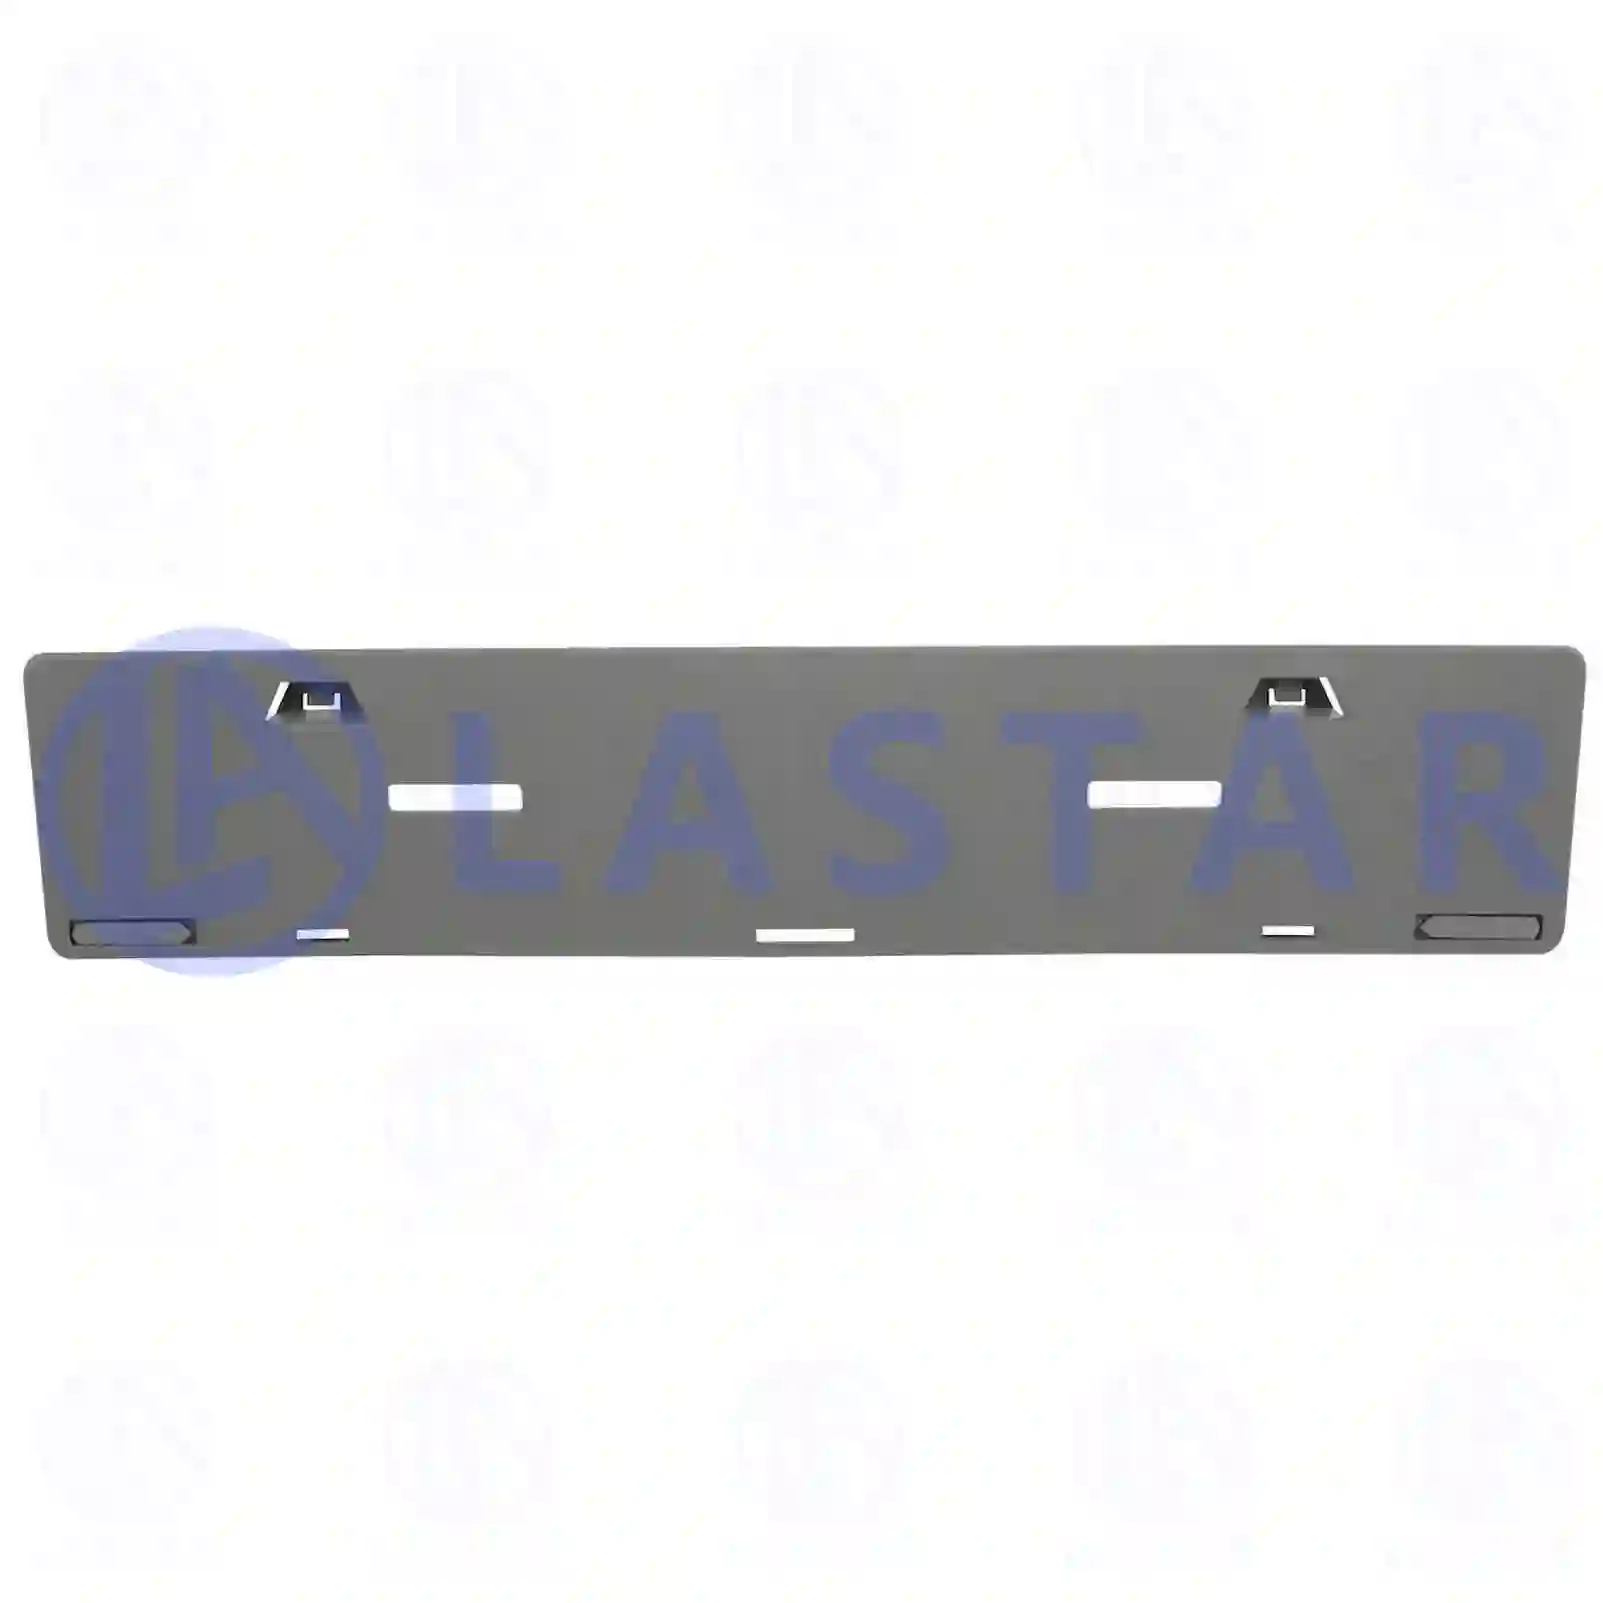 License plate holder, 77718765, 9738800025 ||  77718765 Lastar Spare Part | Truck Spare Parts, Auotomotive Spare Parts License plate holder, 77718765, 9738800025 ||  77718765 Lastar Spare Part | Truck Spare Parts, Auotomotive Spare Parts